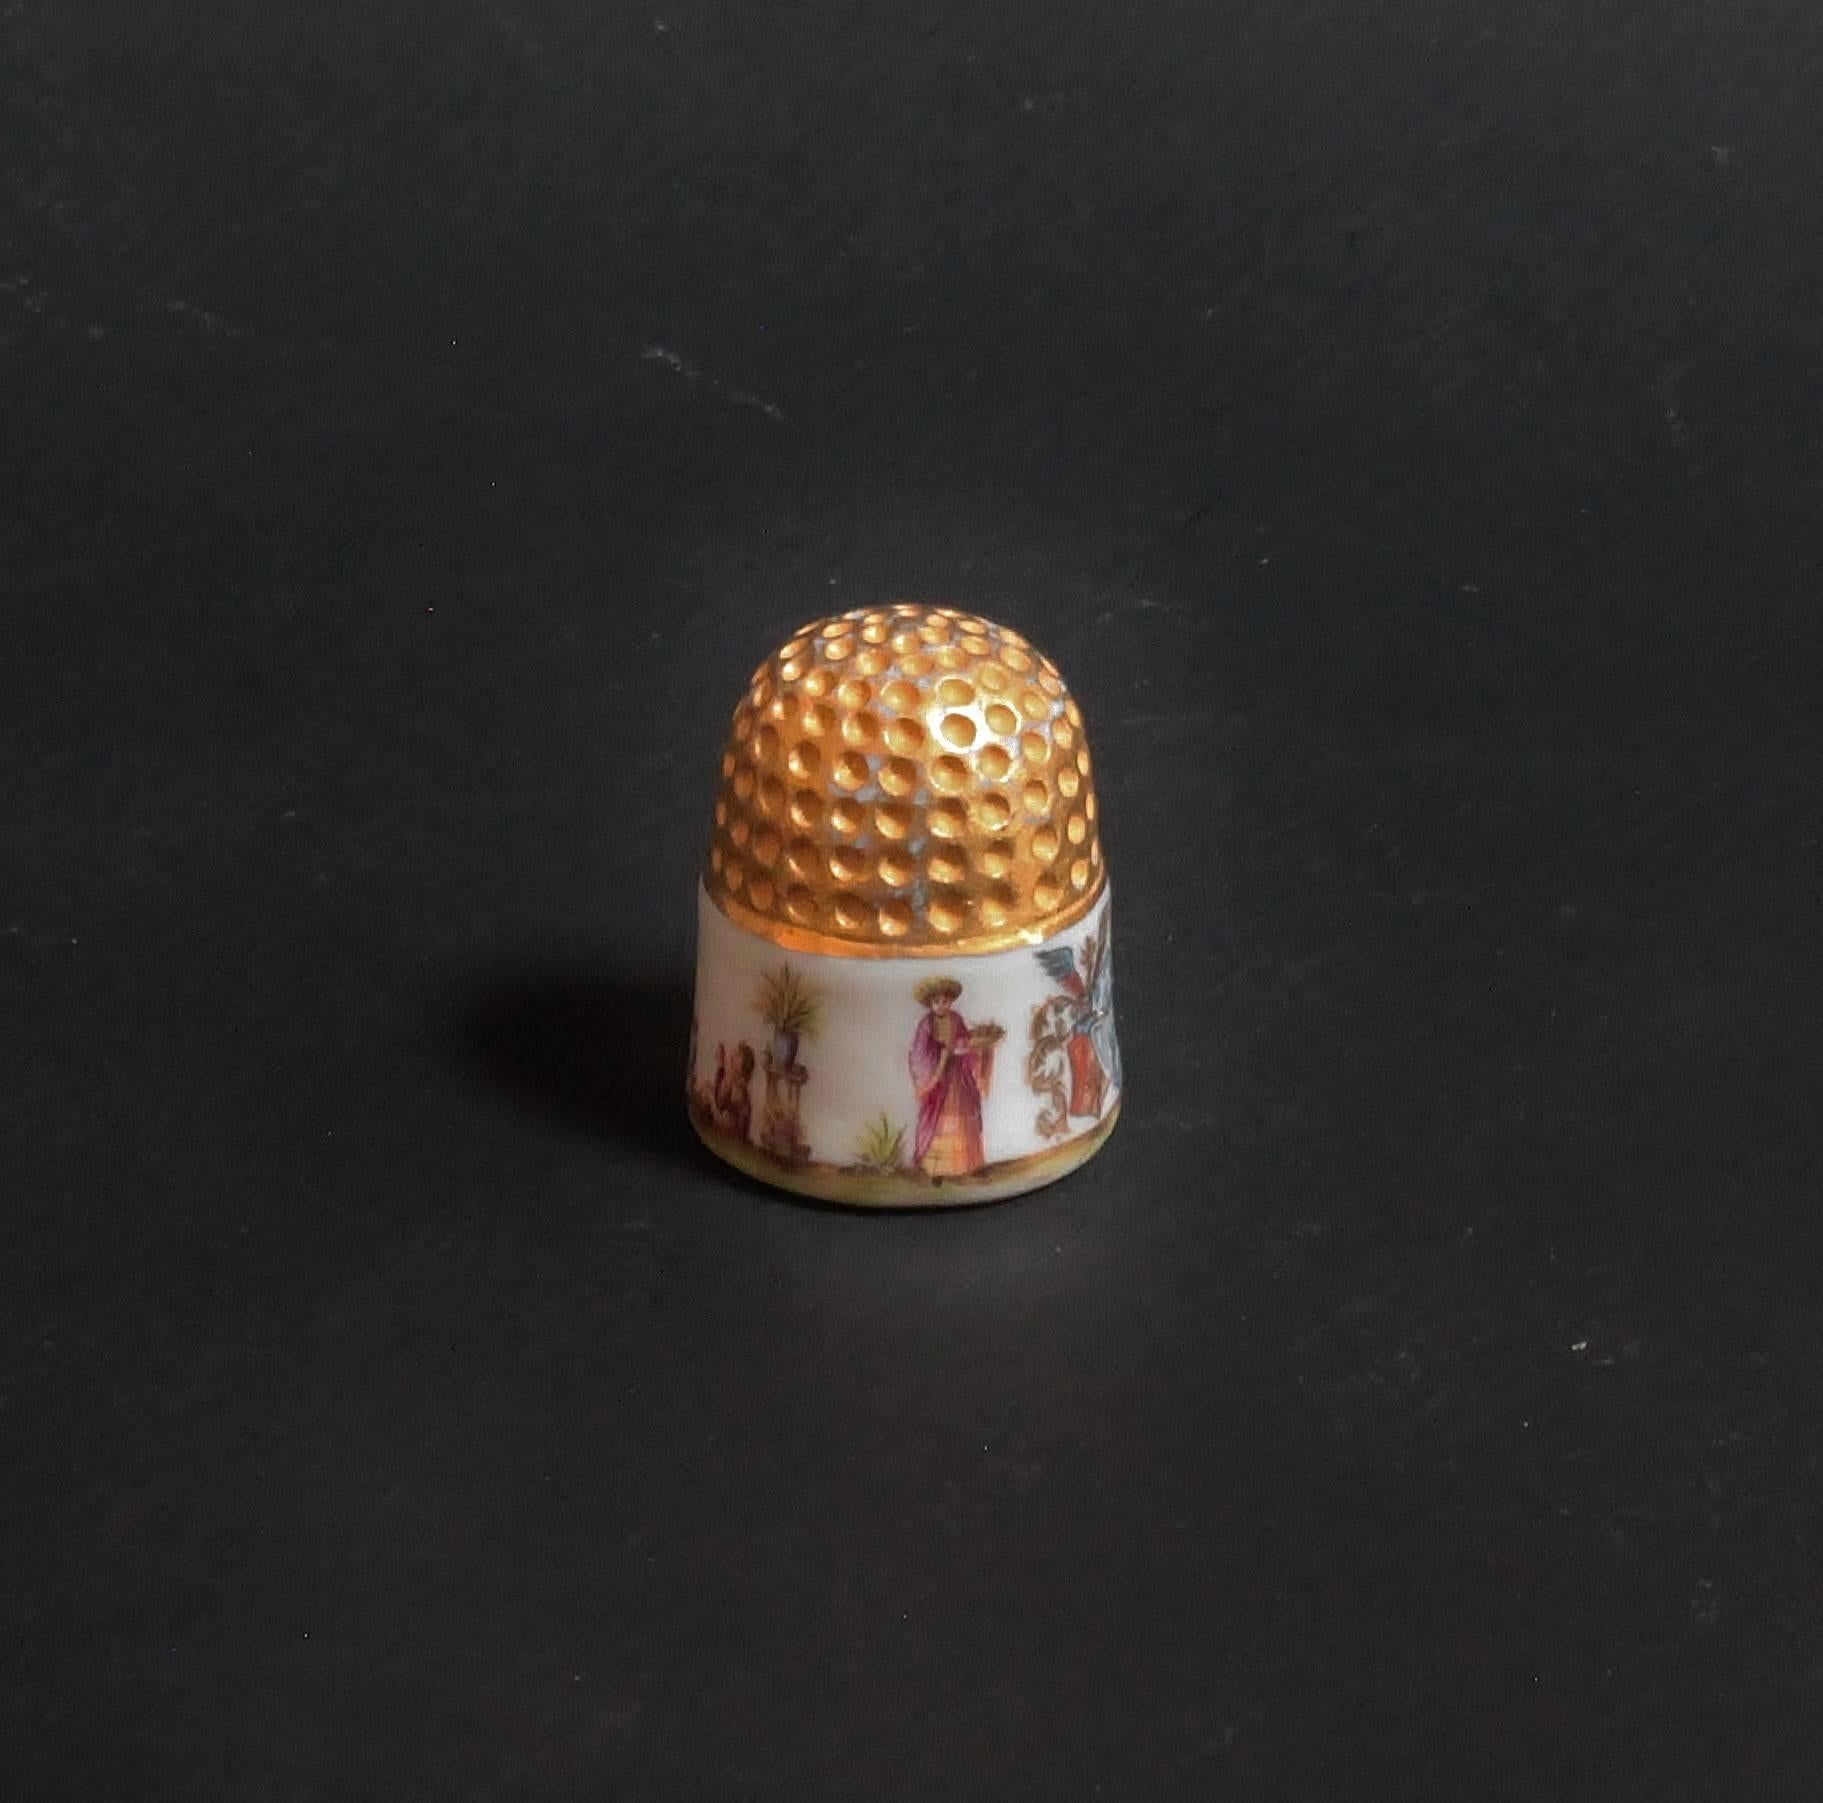 German Meissen Porcelain Thimble with Chinoiserie Scenes, circa 1735-1740